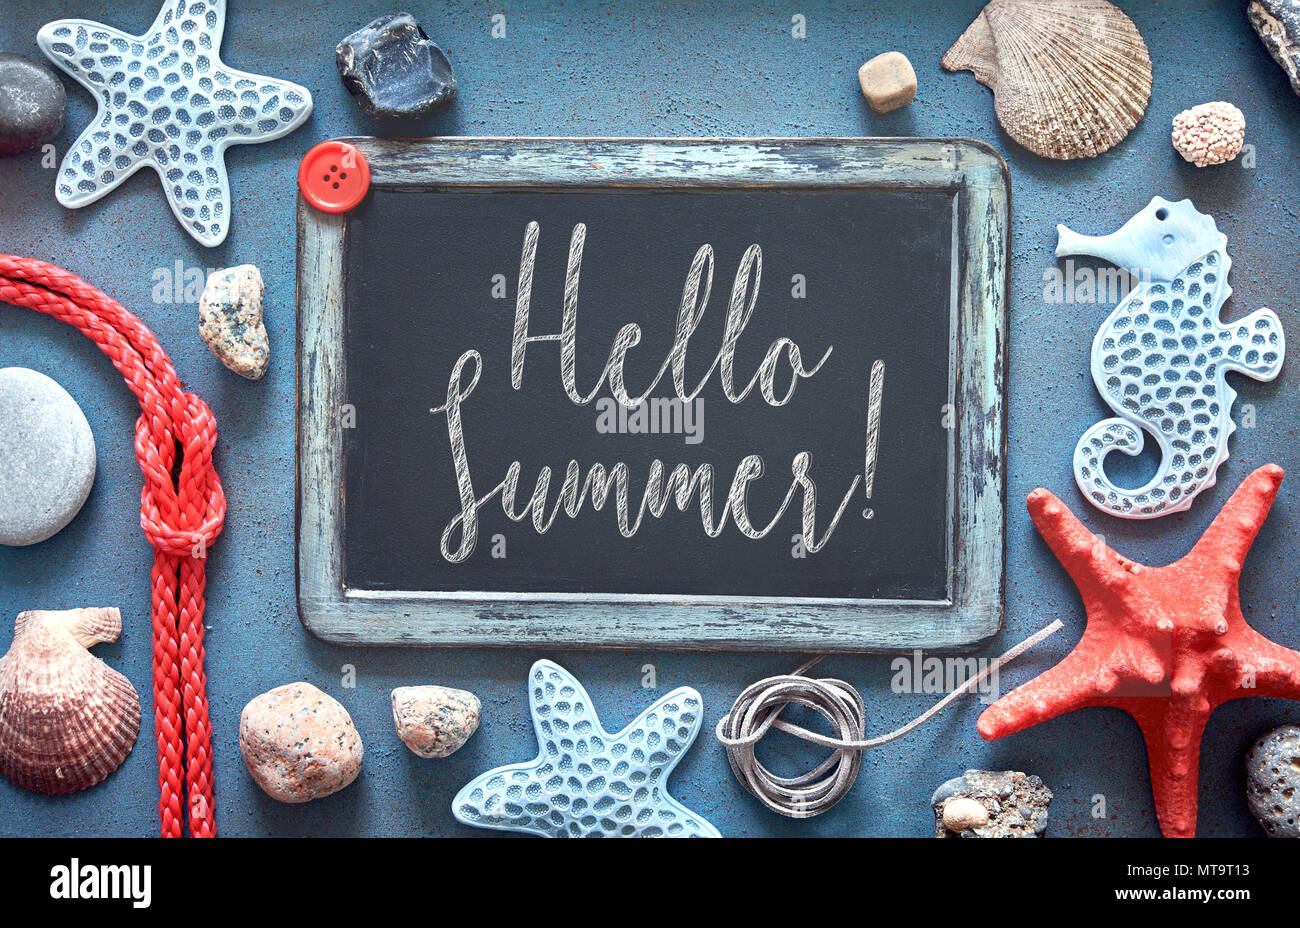 Blank blackboard with sea shells, rope and star fish on blue structured background, text 'Hello Summer' Stock Photo